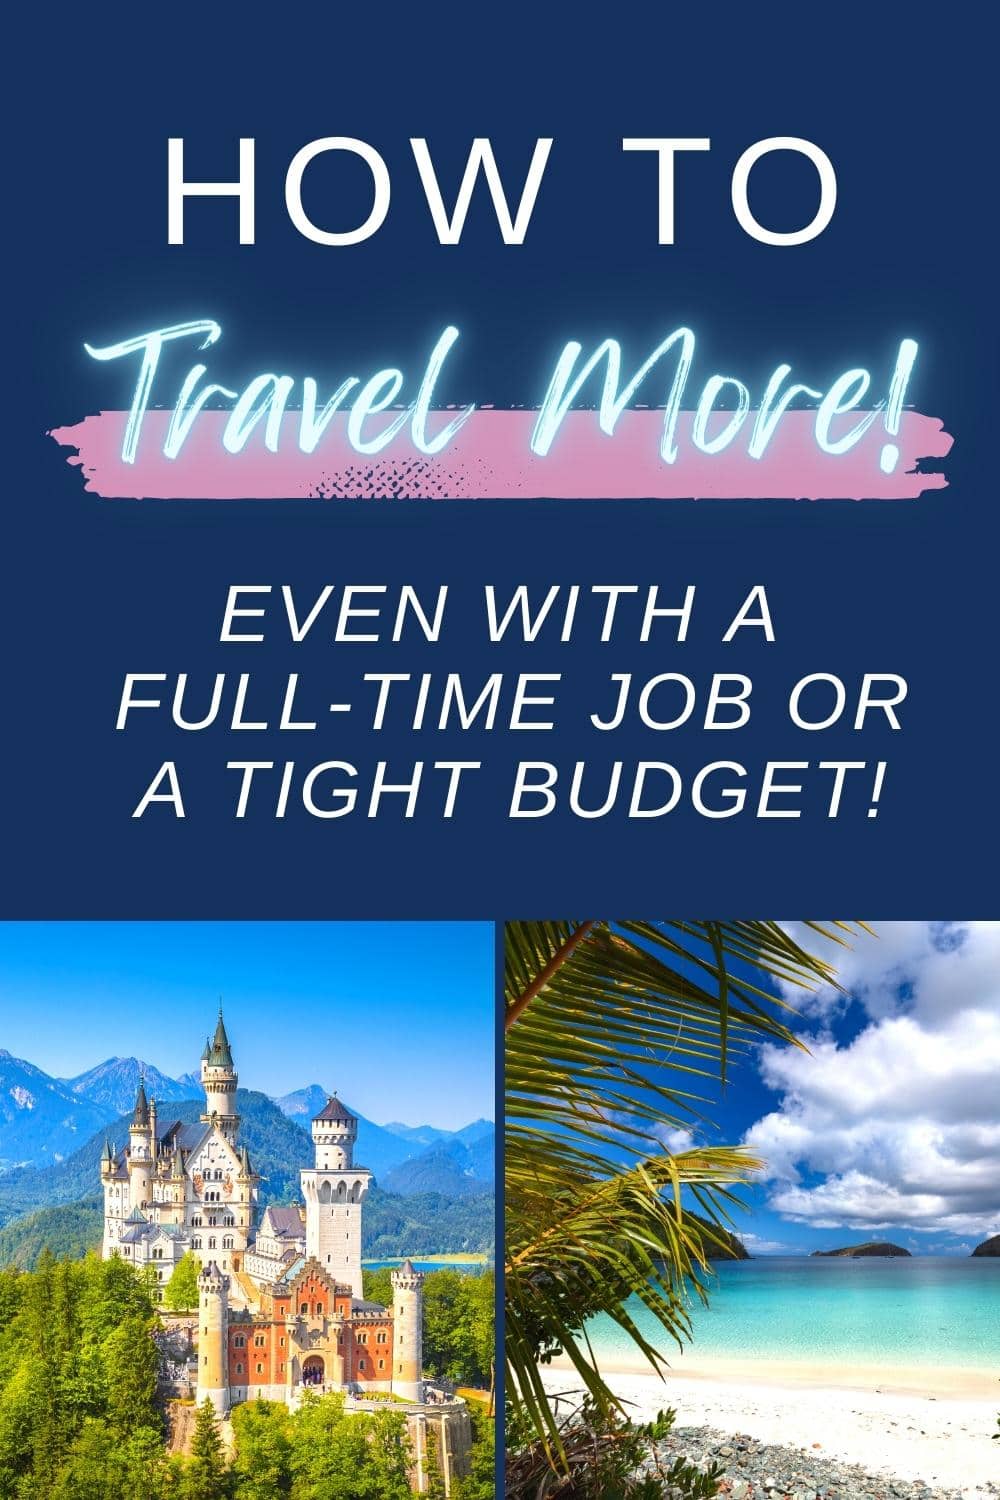 How to Travel More: 21 Useful Tips, Even with a Full-Time Job or Tight Budget